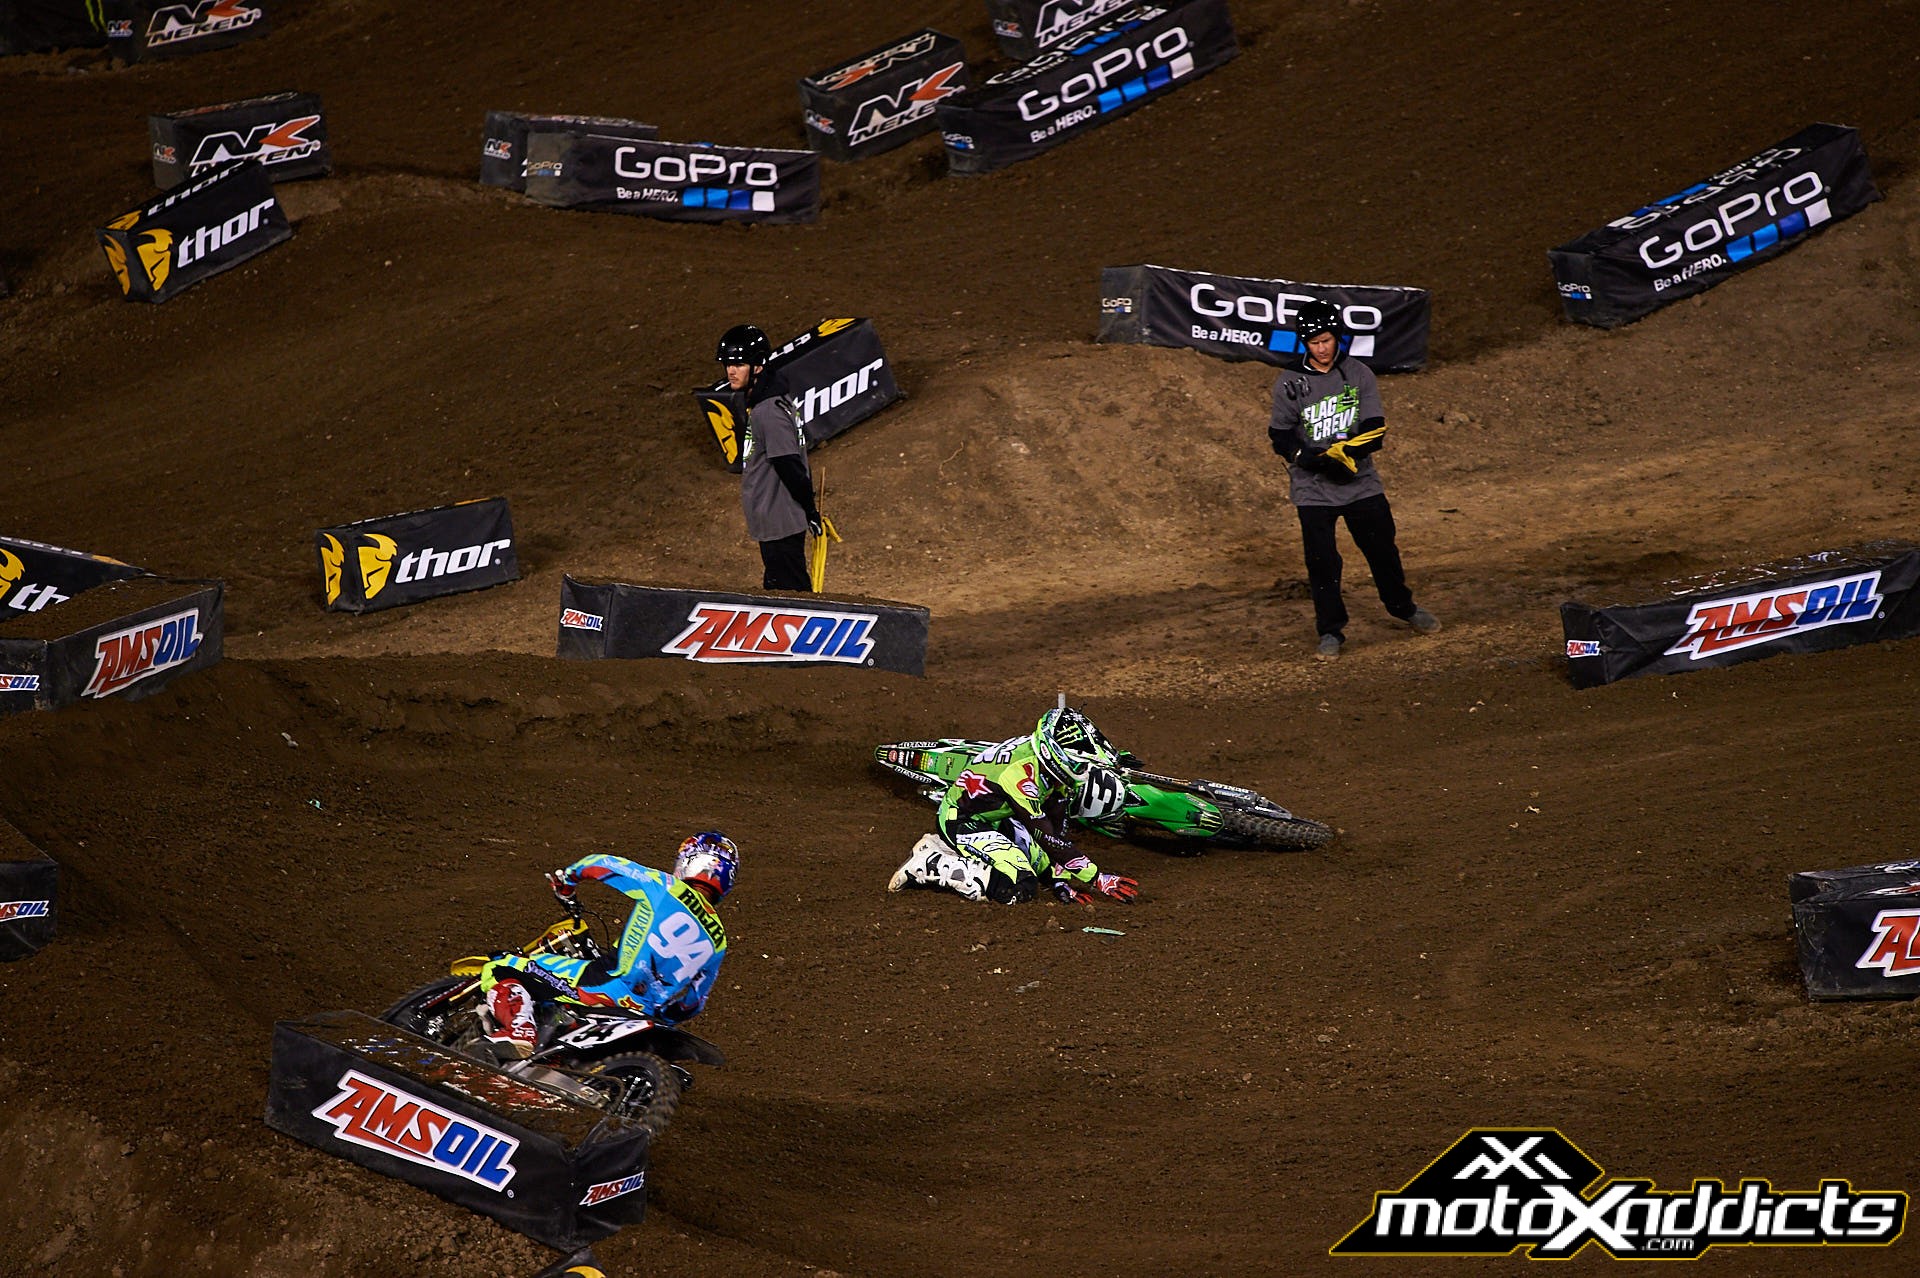 Tomac (on the ground) crashed while battling with Reed for 2nd, and Roczen (#94) inherited his first podium of the season. Photo by: Hoppenworld